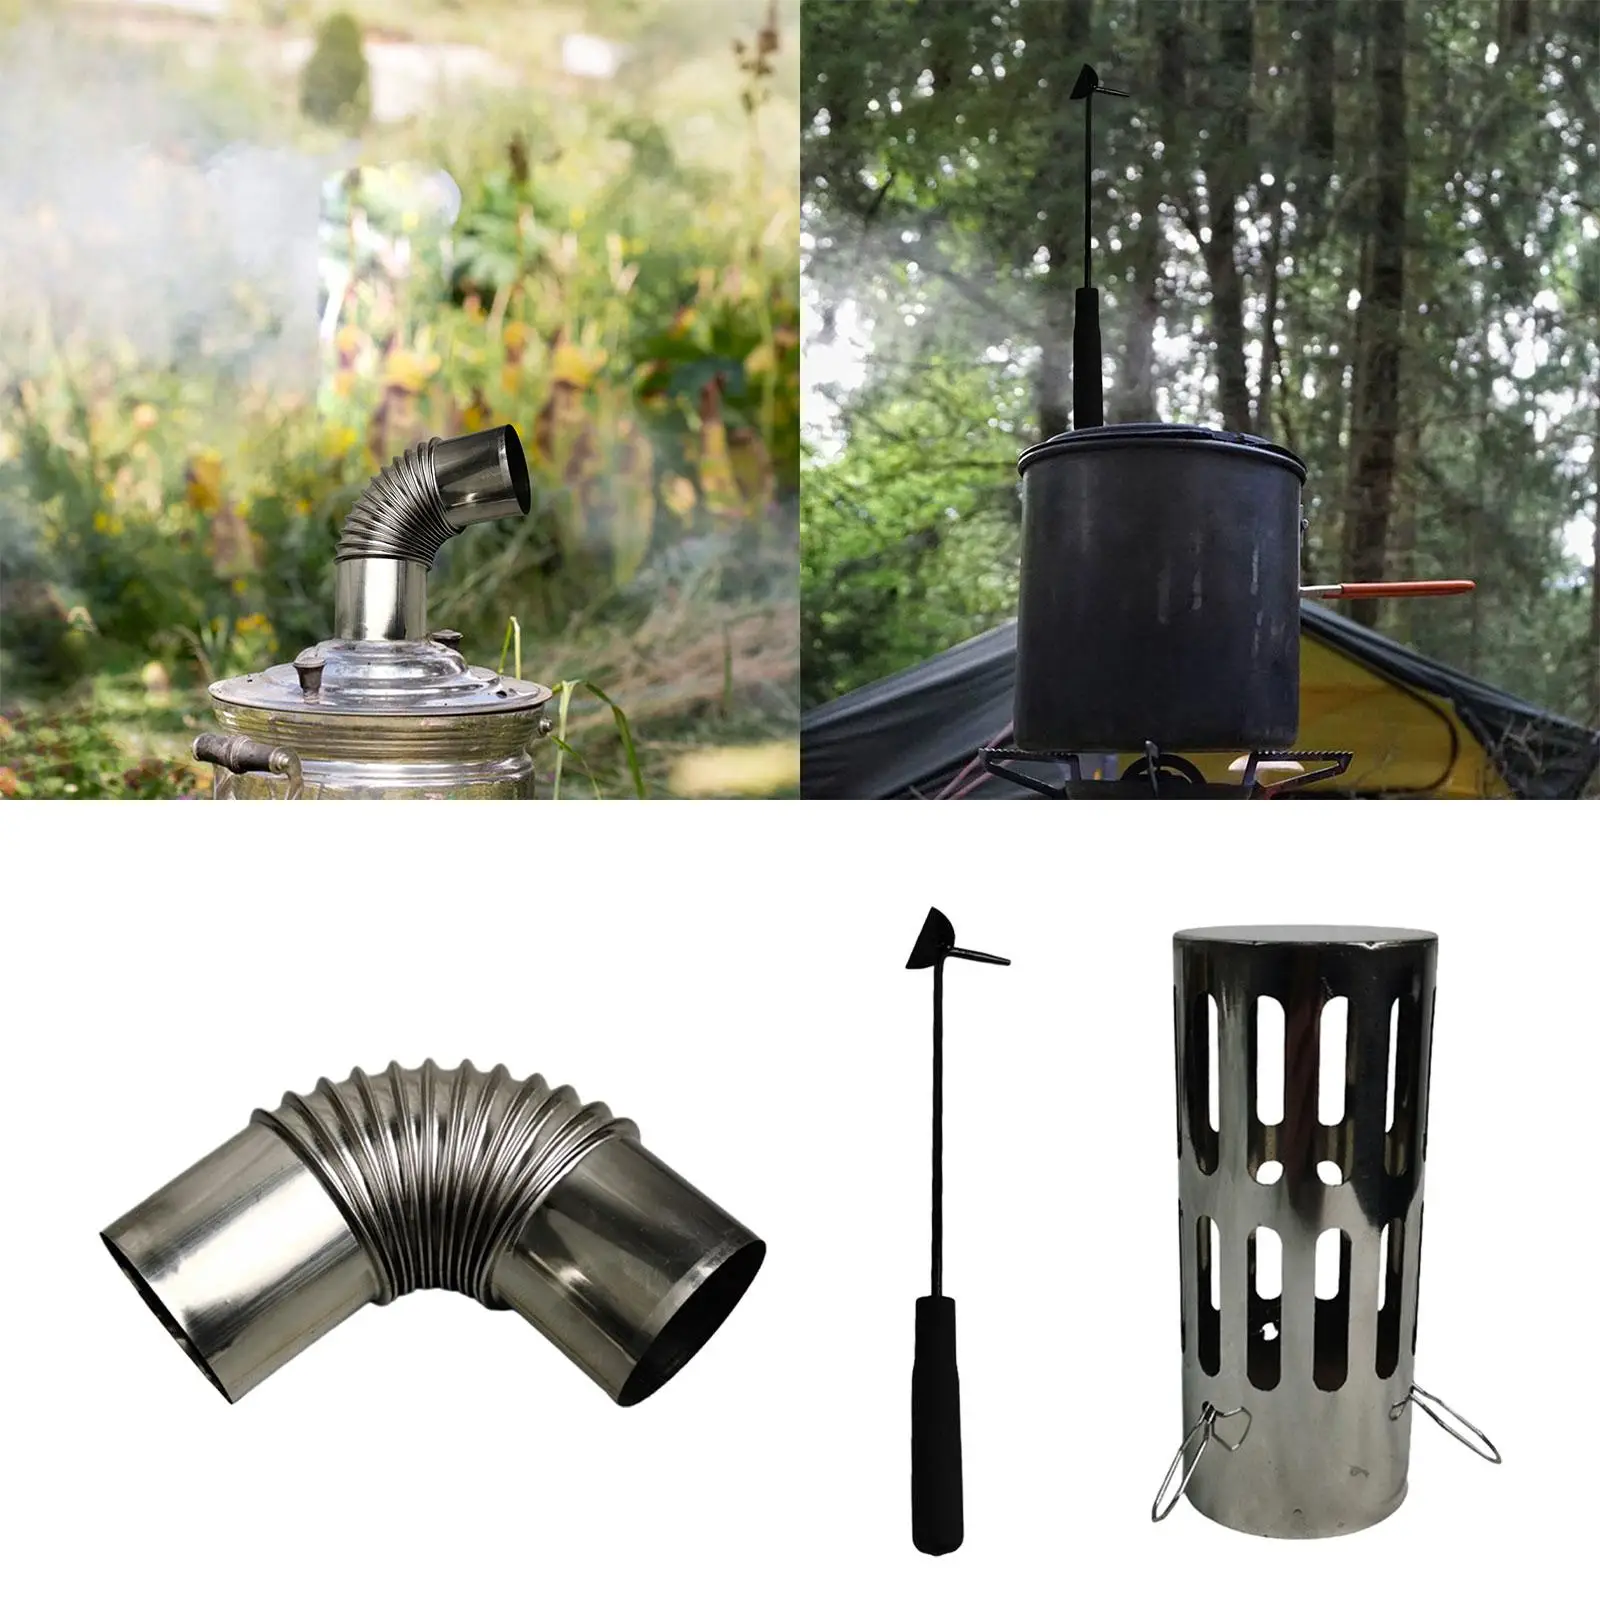 Stove Accessories Fittings Stainless Steel Stovepipe Accessories for Hiking Outdoor Camping Grill Wood Log Burning Stove